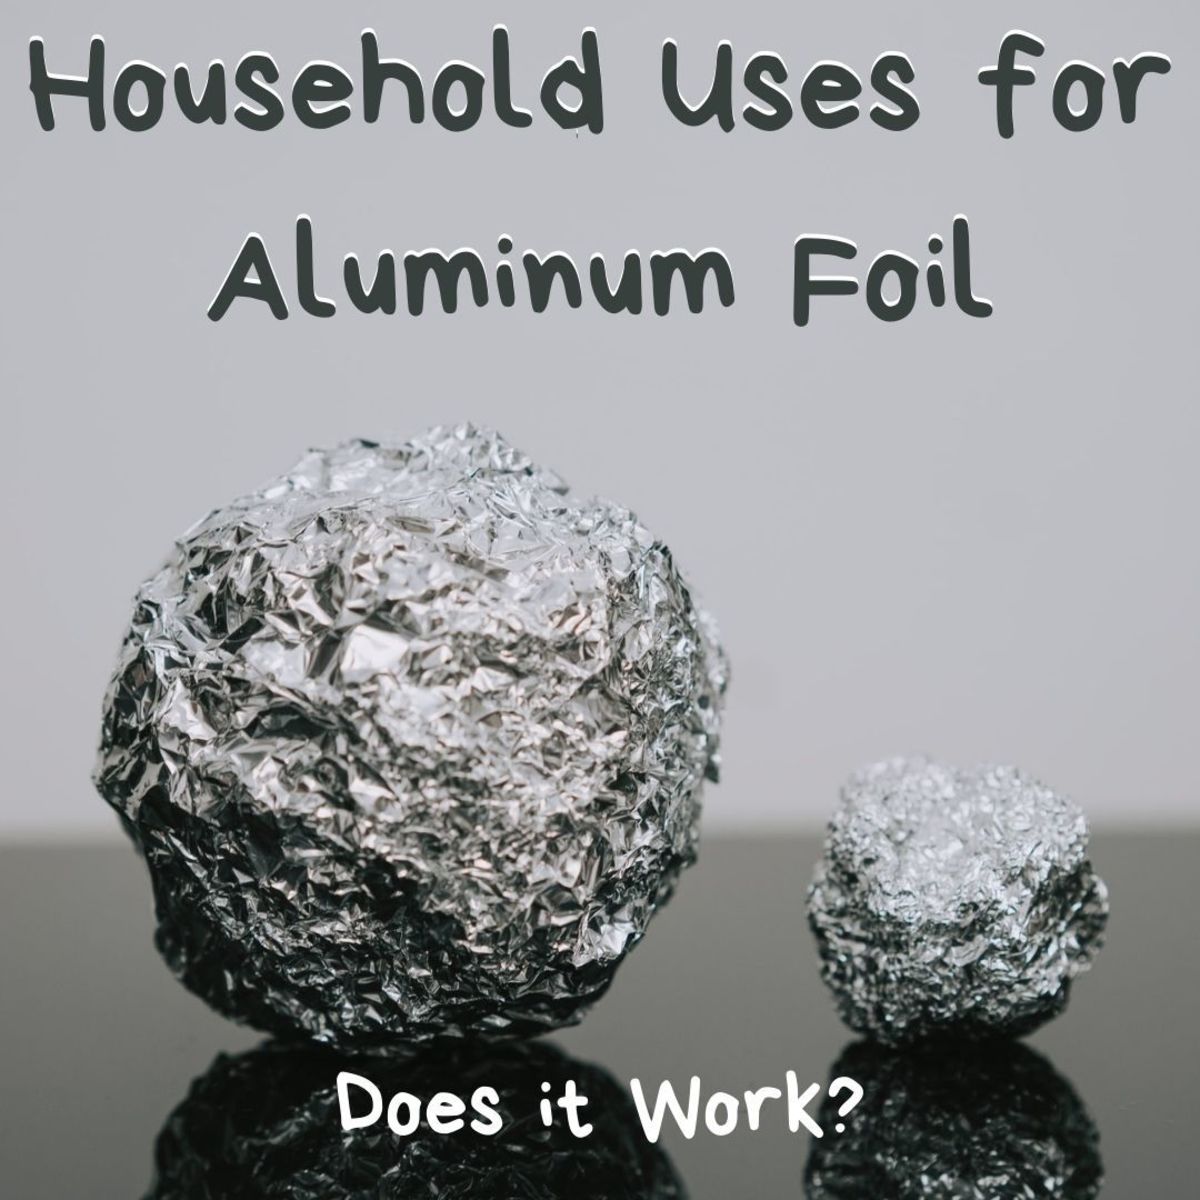 Household Uses for Used Aluminum Foil - Does it Work?